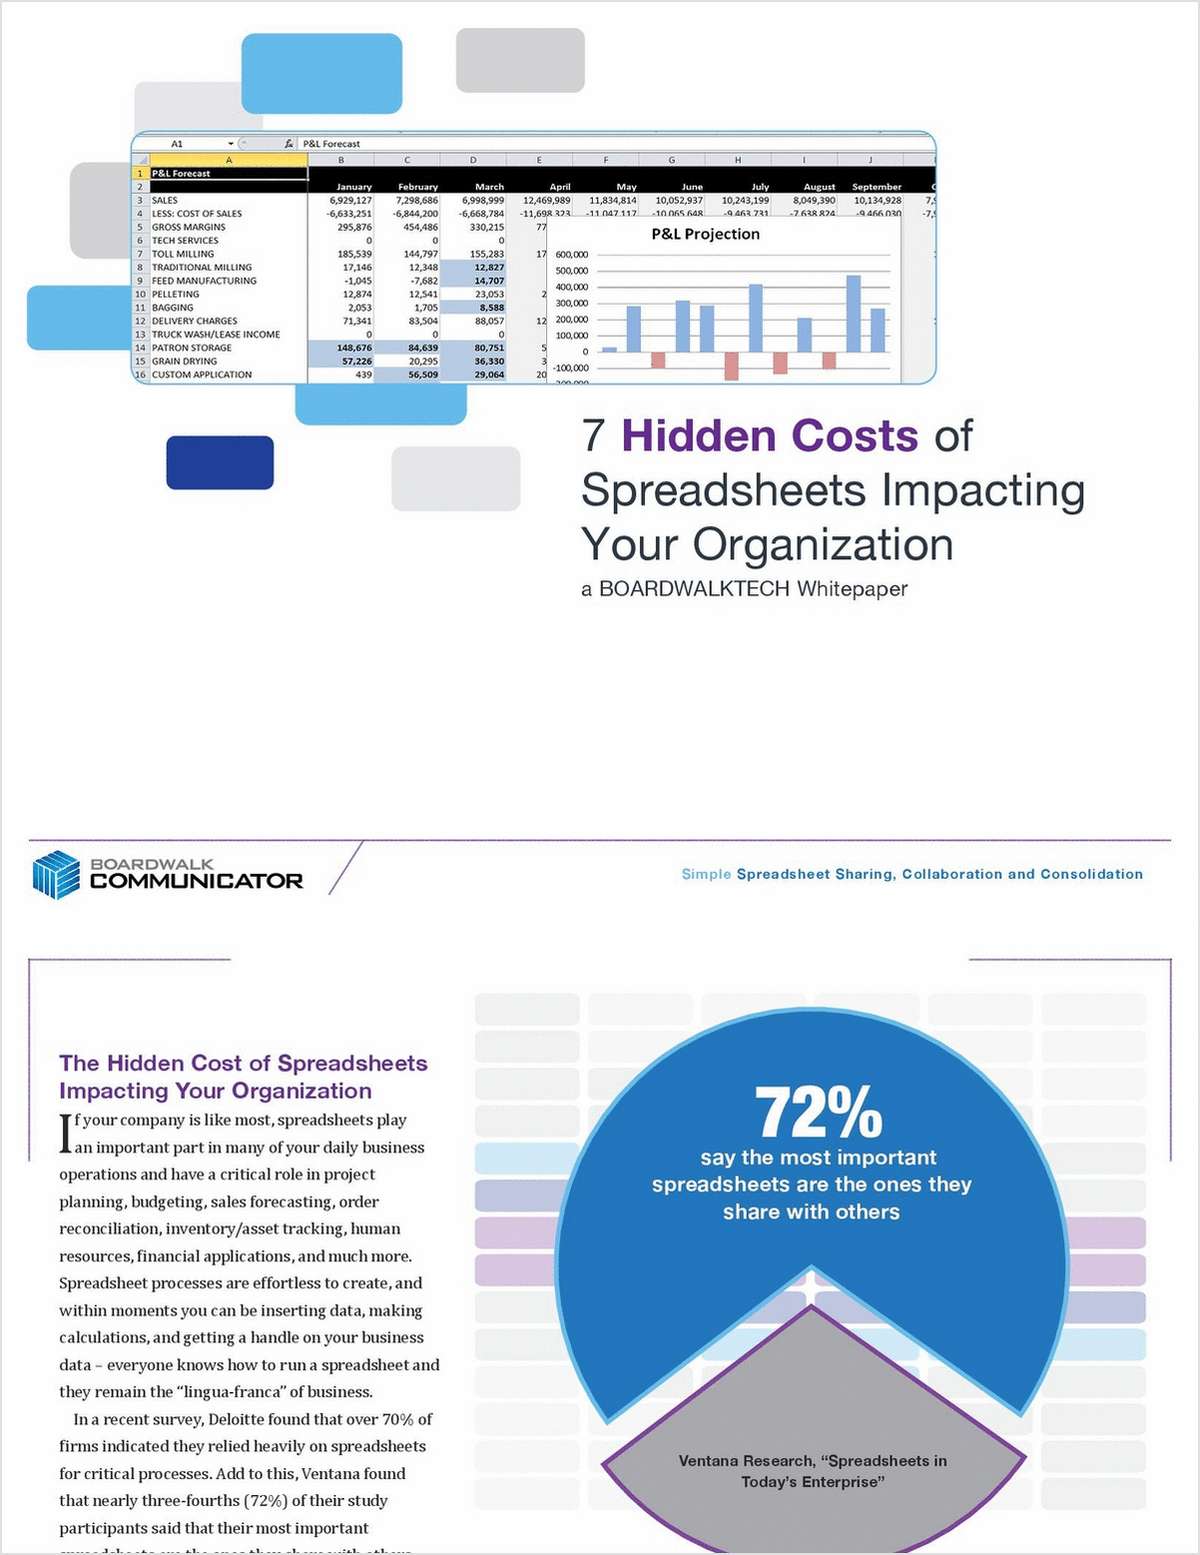 What are the 7 Hidden Costs of Spreadsheets?